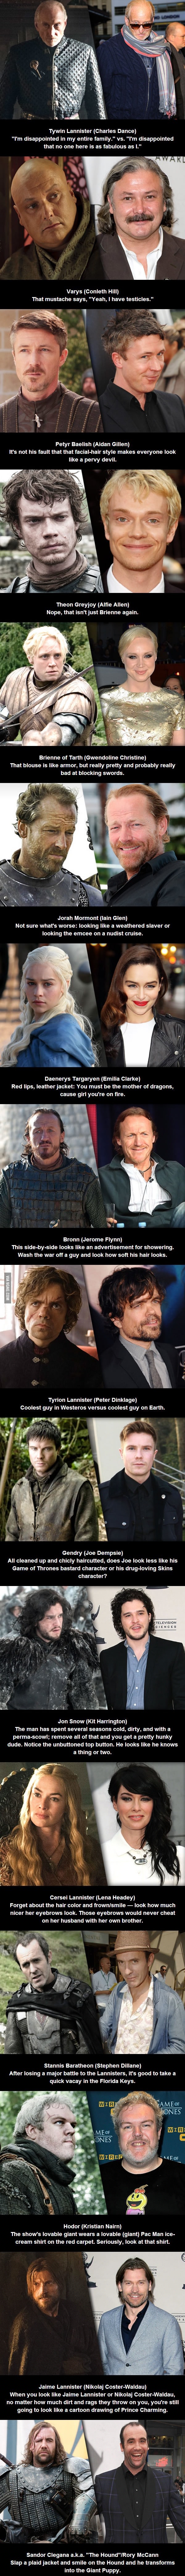 Game Of Thrones Actors In Real Life